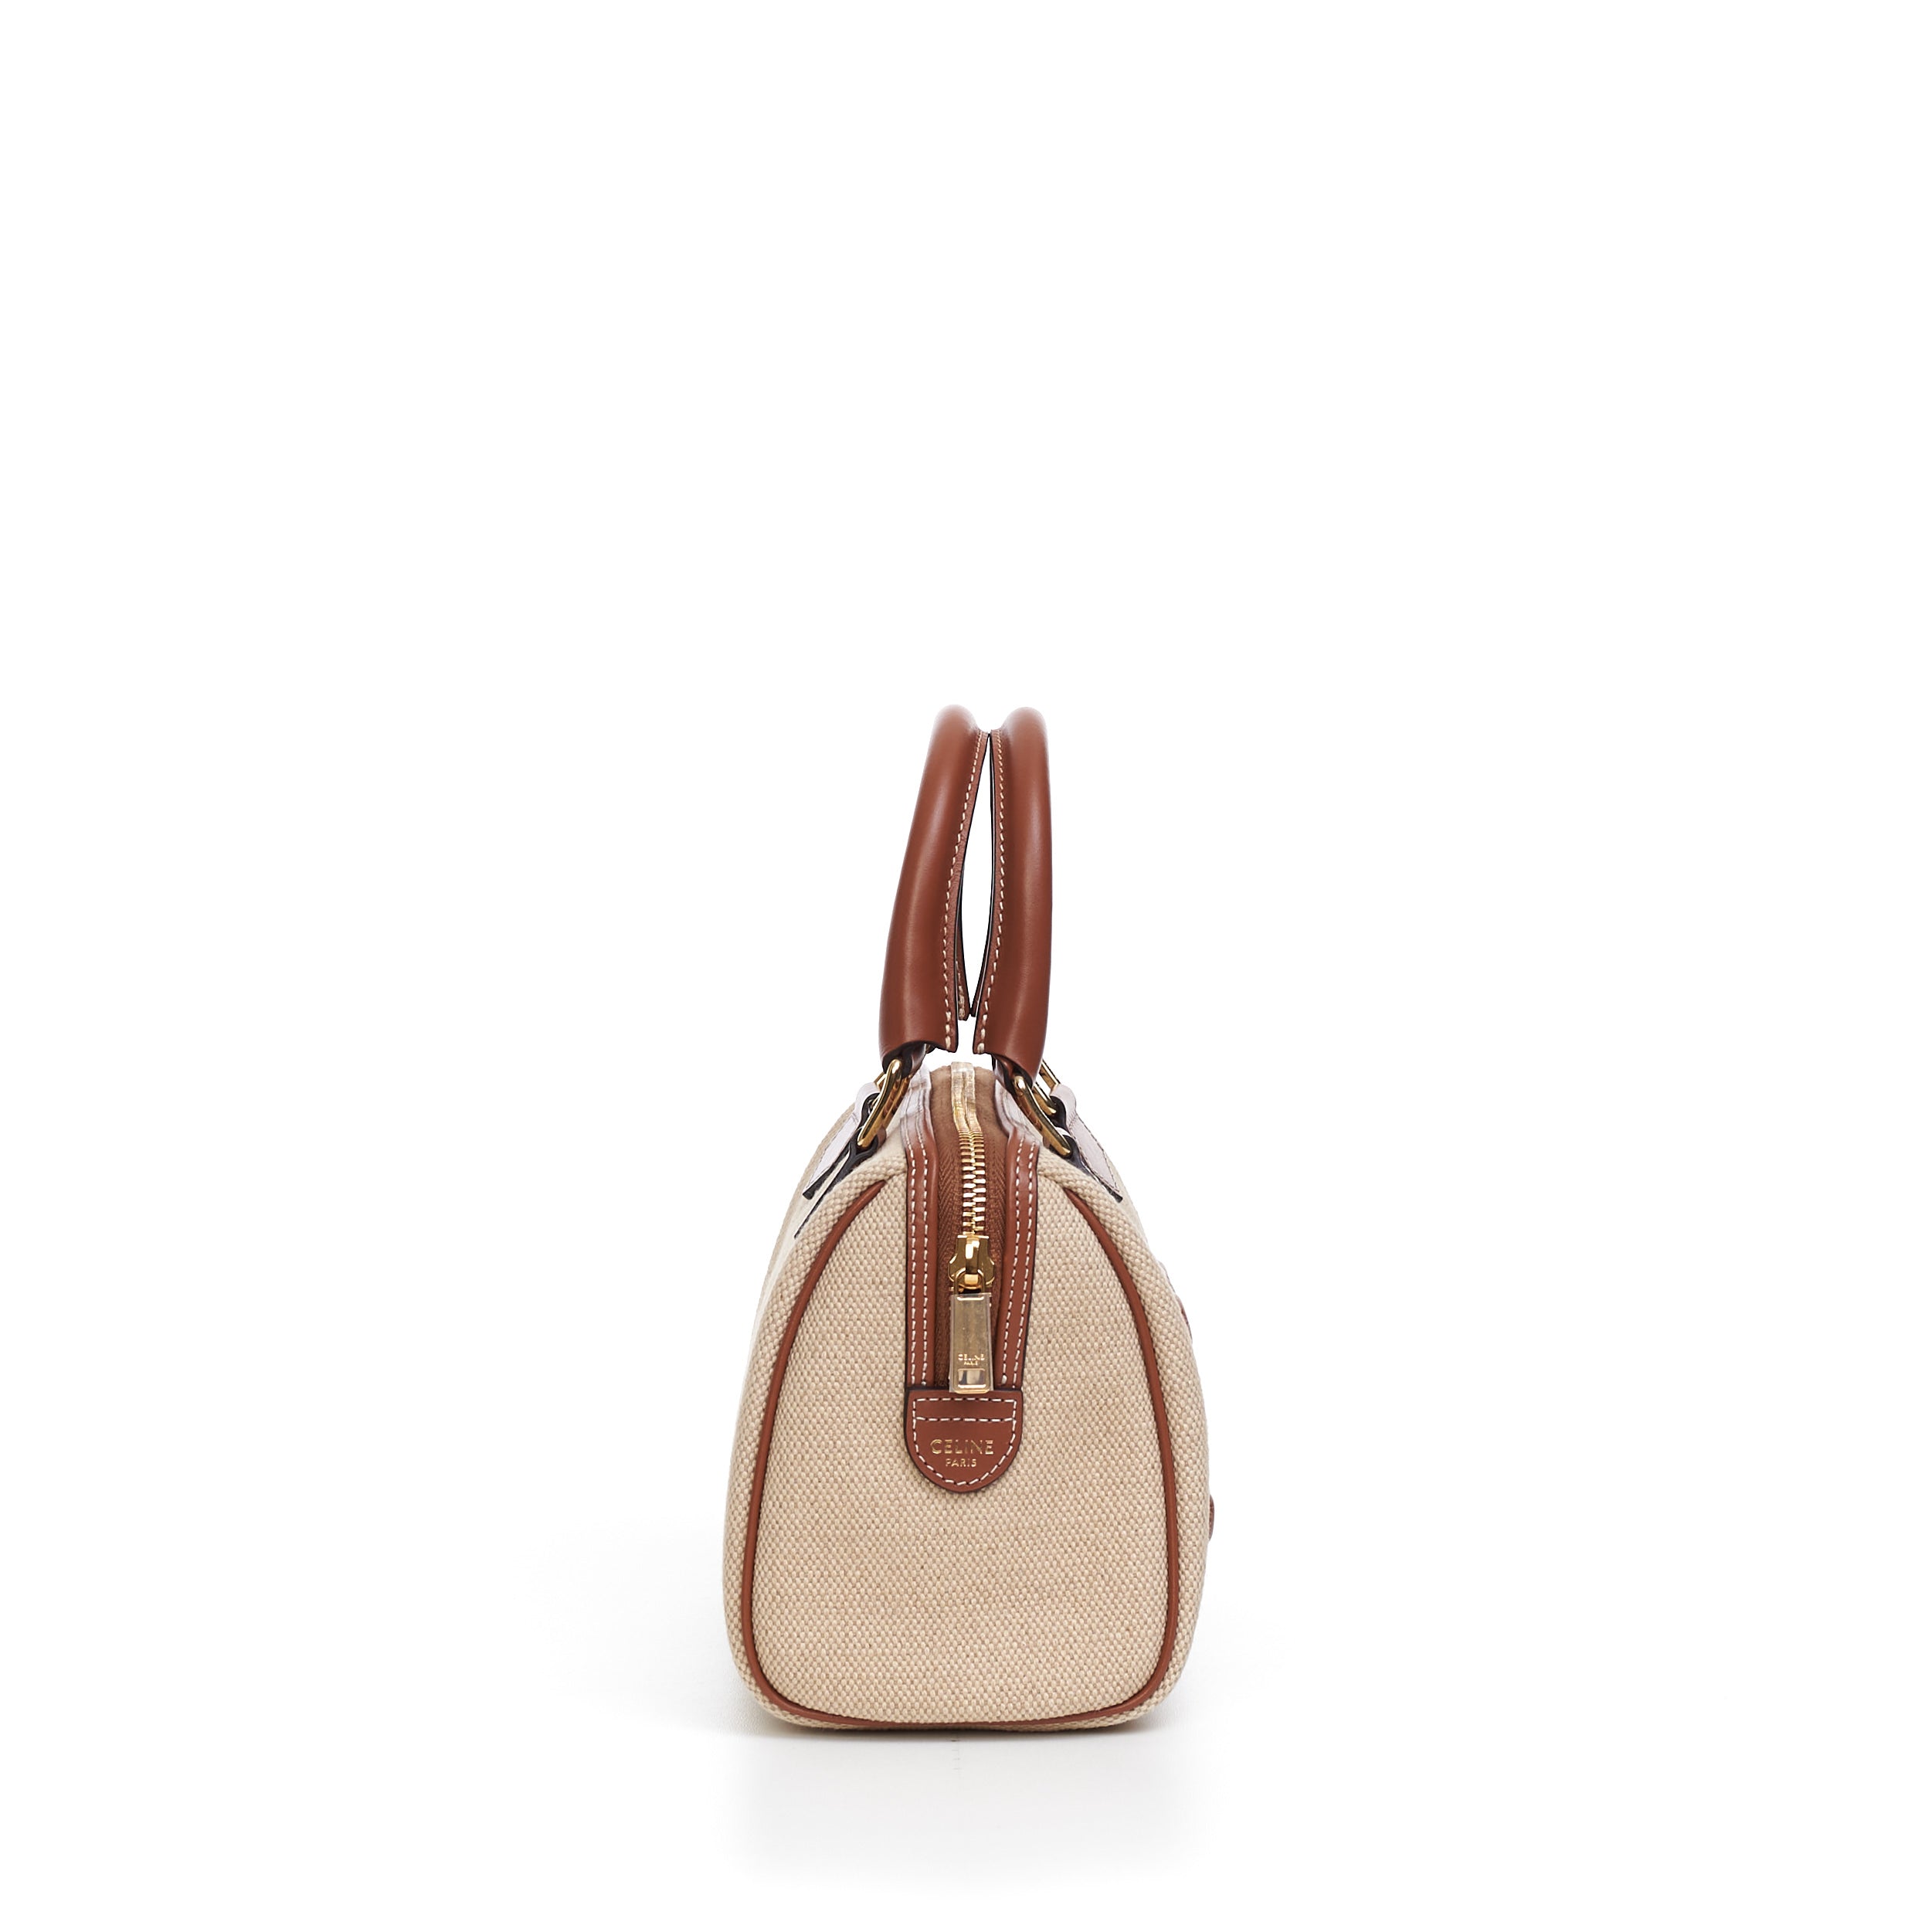 Celine Cuir Triomphe Small Canvas & Leather Bucket Bag in Brown